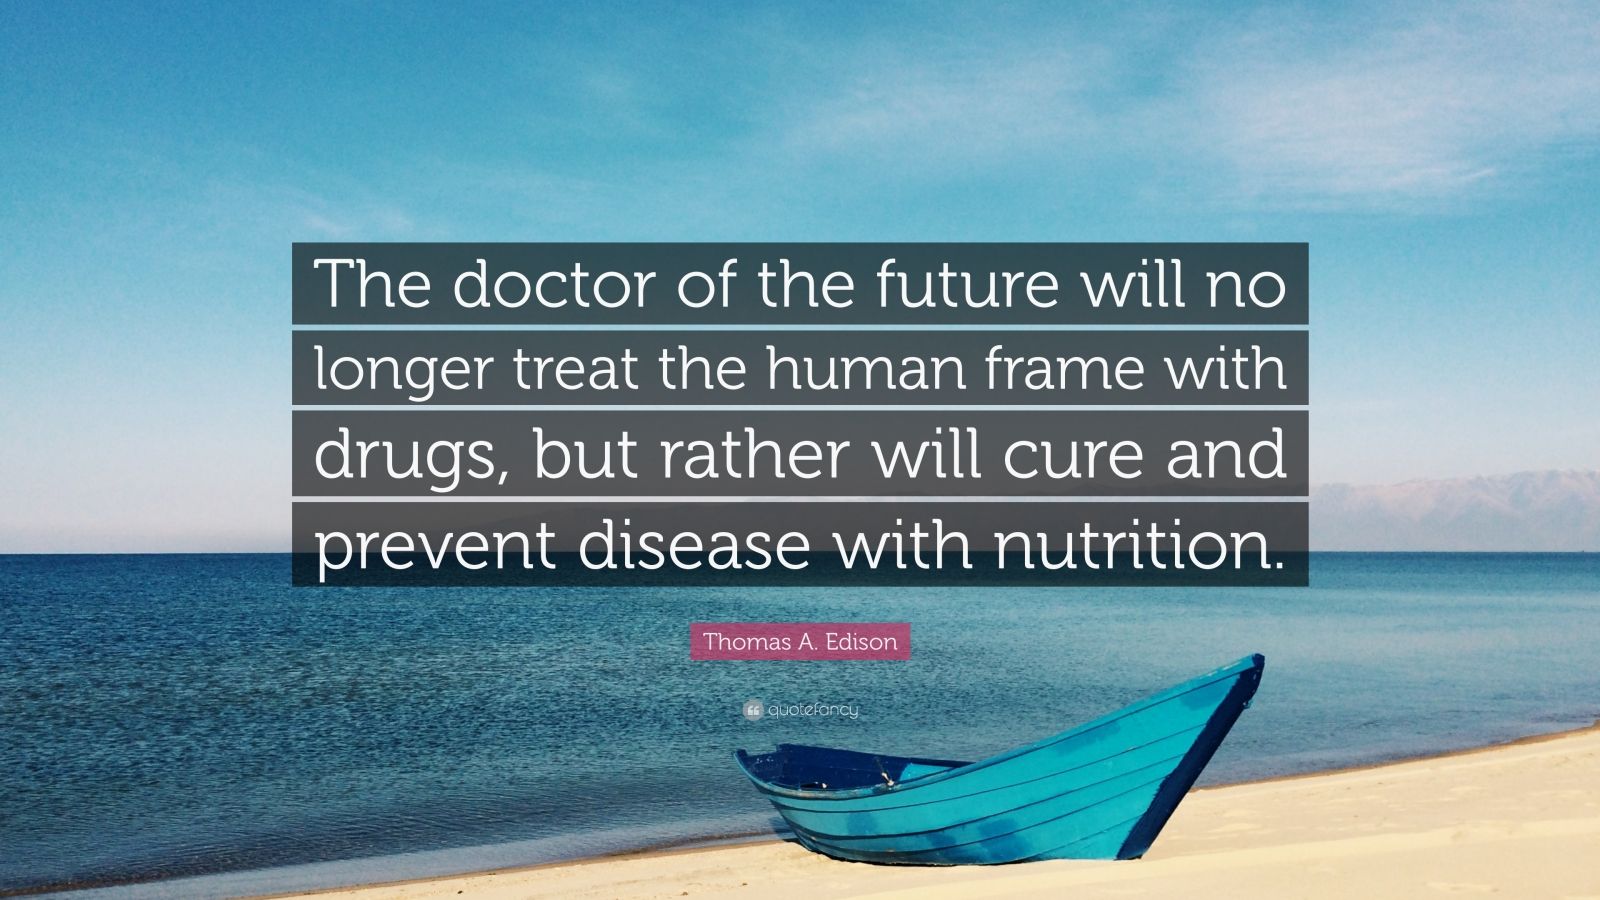 Thomas A. Edison Quote: "The doctor of the future will no longer treat the human frame with ...